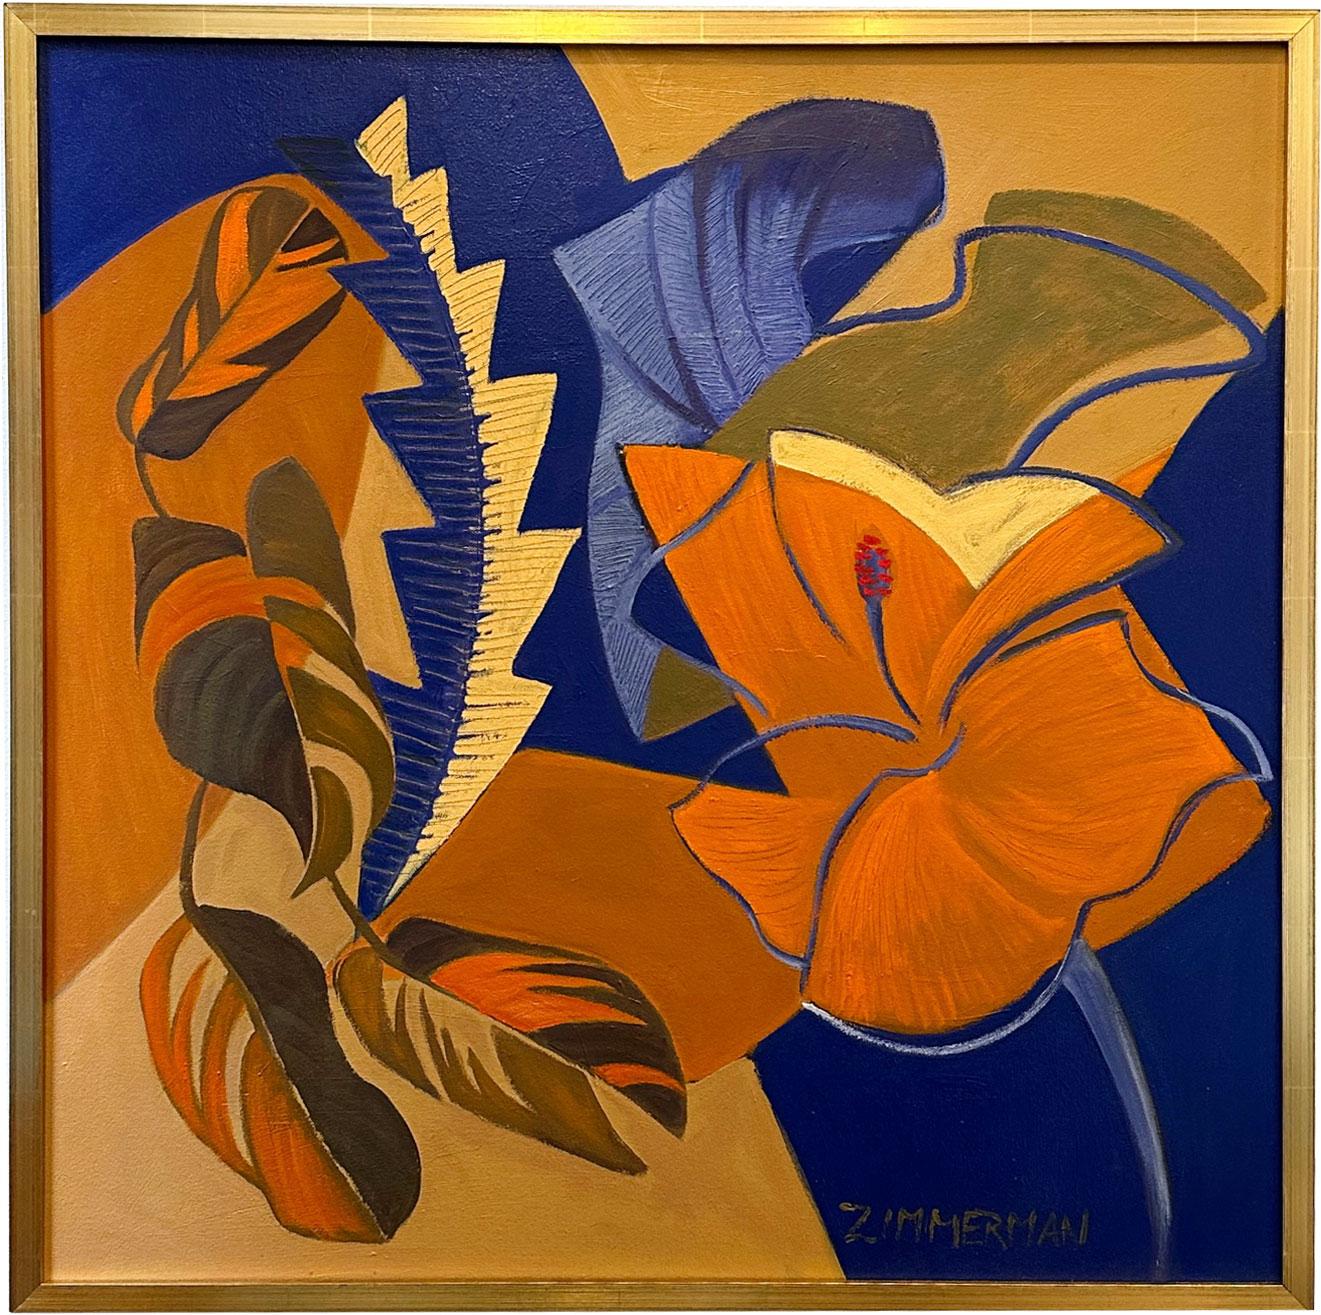 Floral Invention #9
A symphony of blue and orange supports this abstract lyrical floral.

This masterpiece is exhibited in the Zimmerman Gallery, Carmel CA.

The painting comes with a certificate of authenticity and a letter of appraisal.

Marc